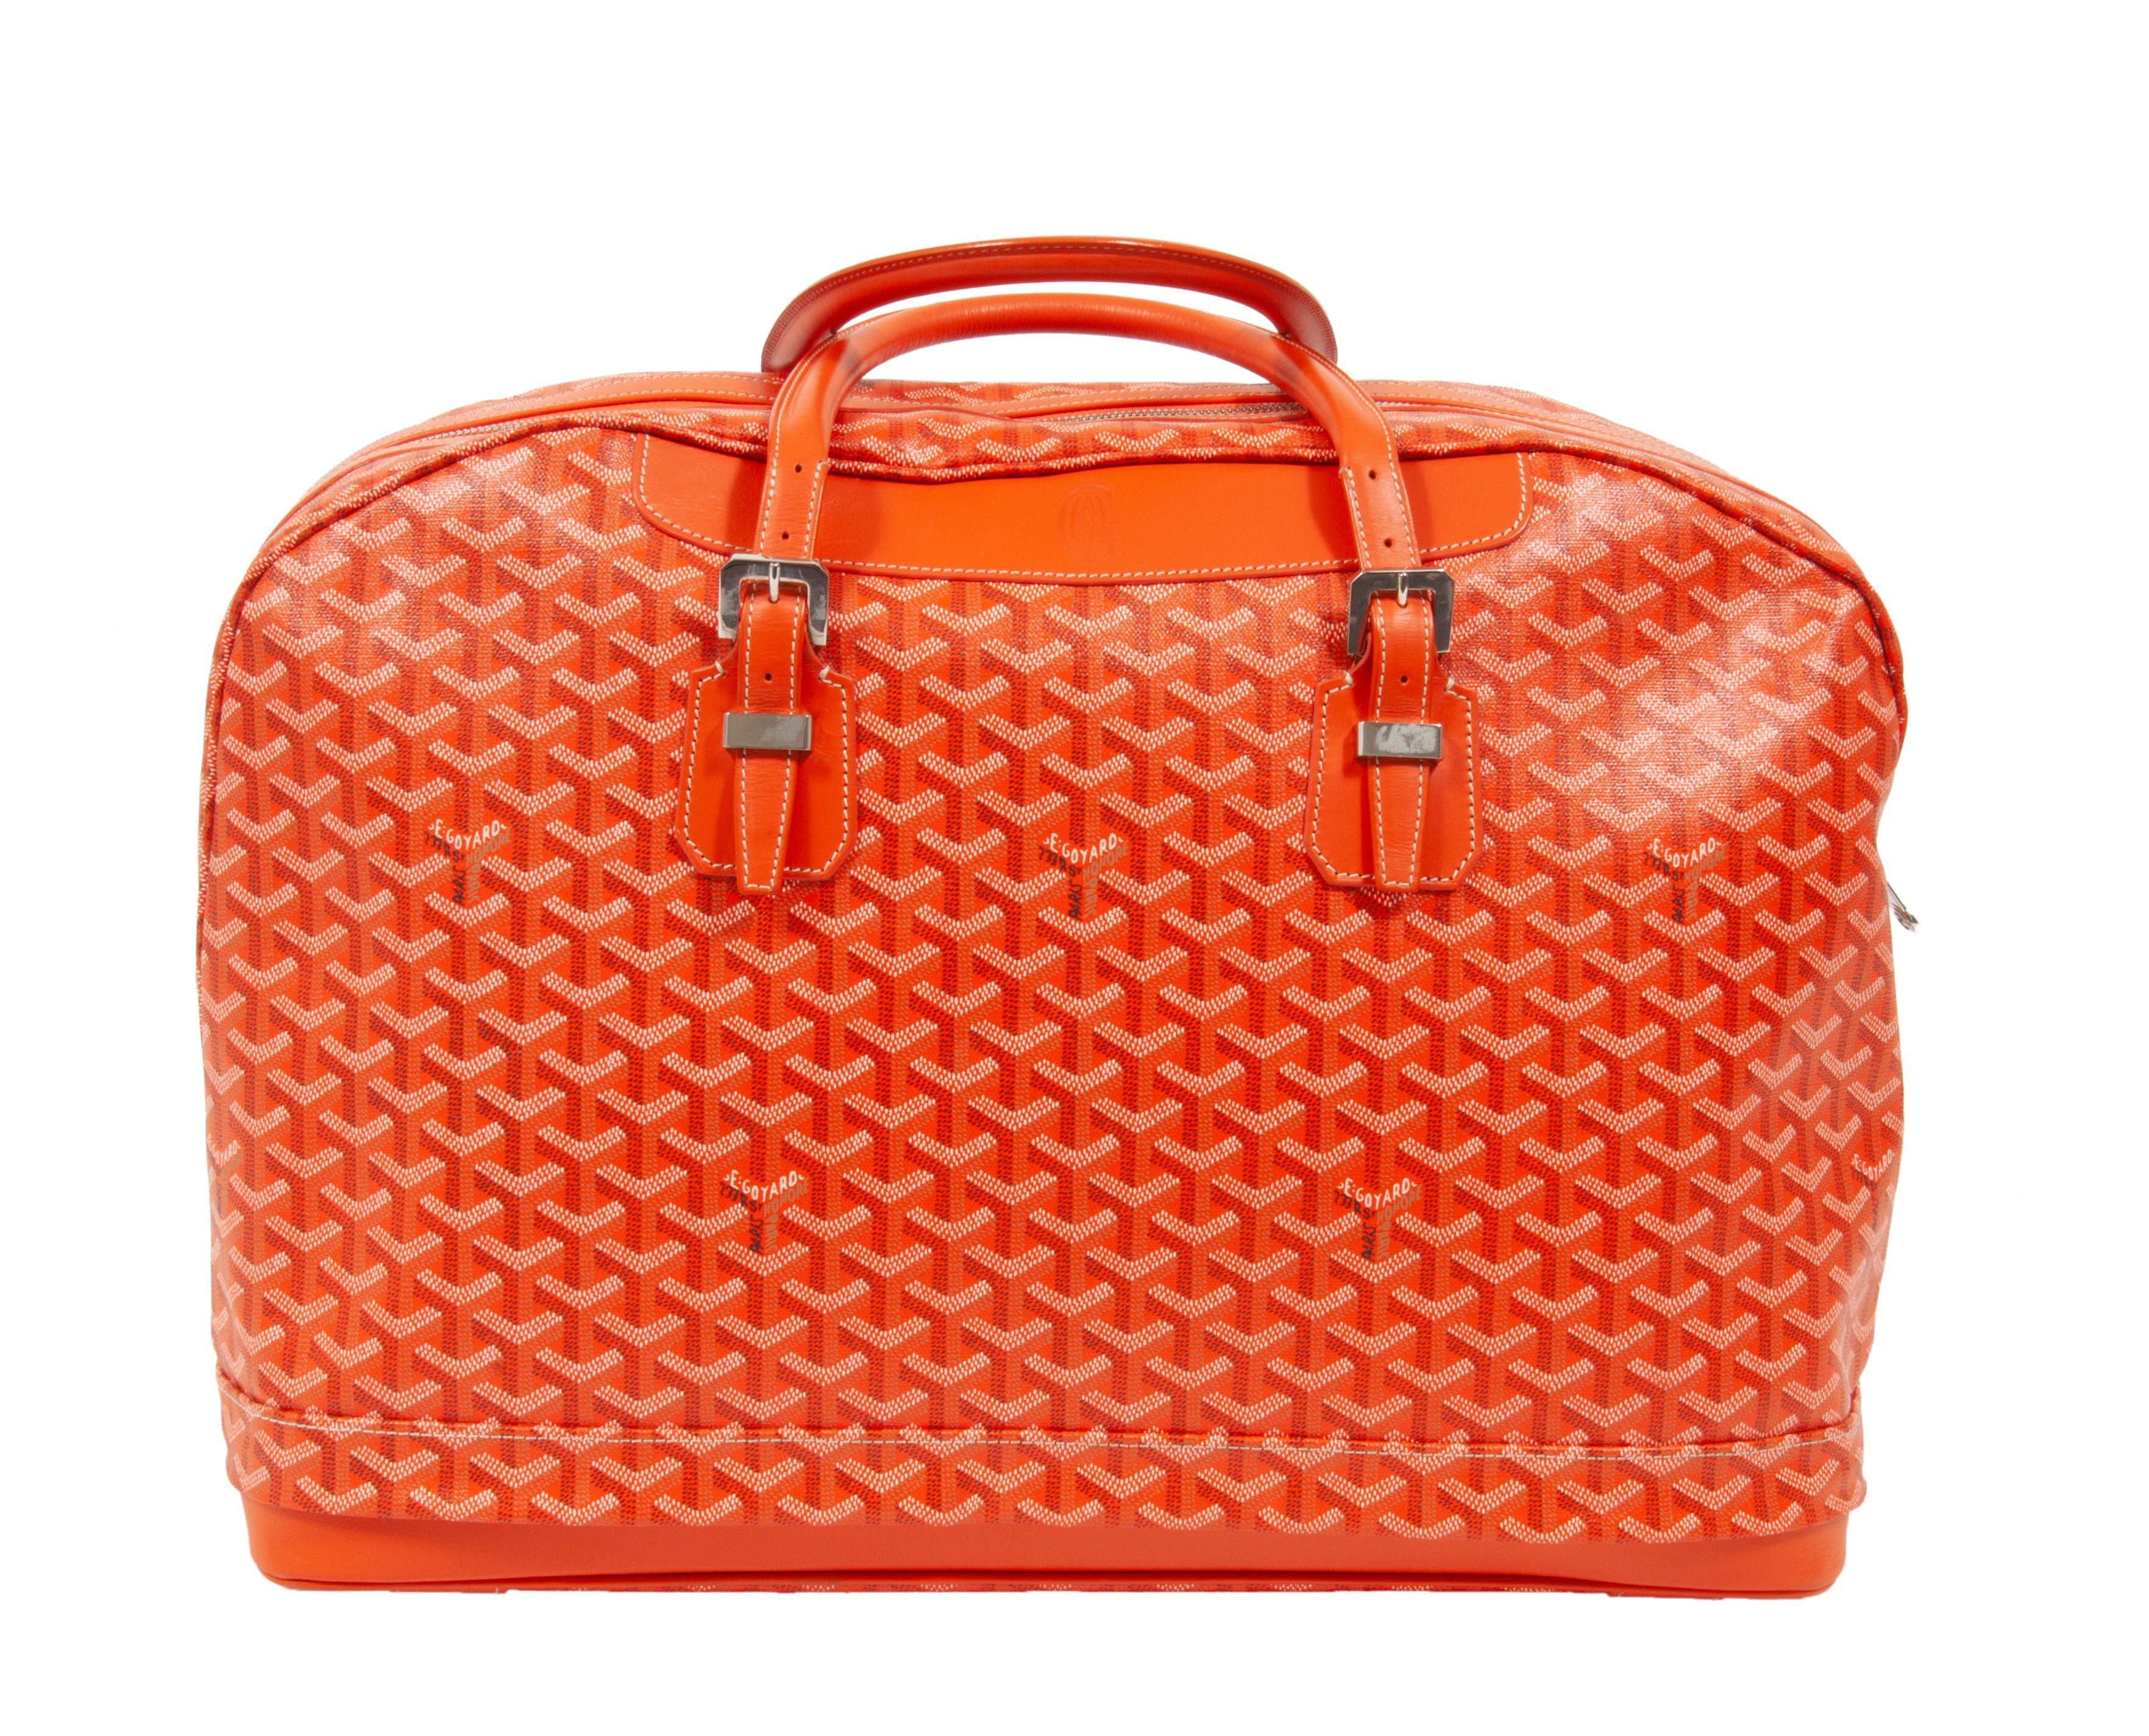 Goyard Hotel Du Parc Red Duffle Bag Extendable Travel Carry On Luggage  Boeing